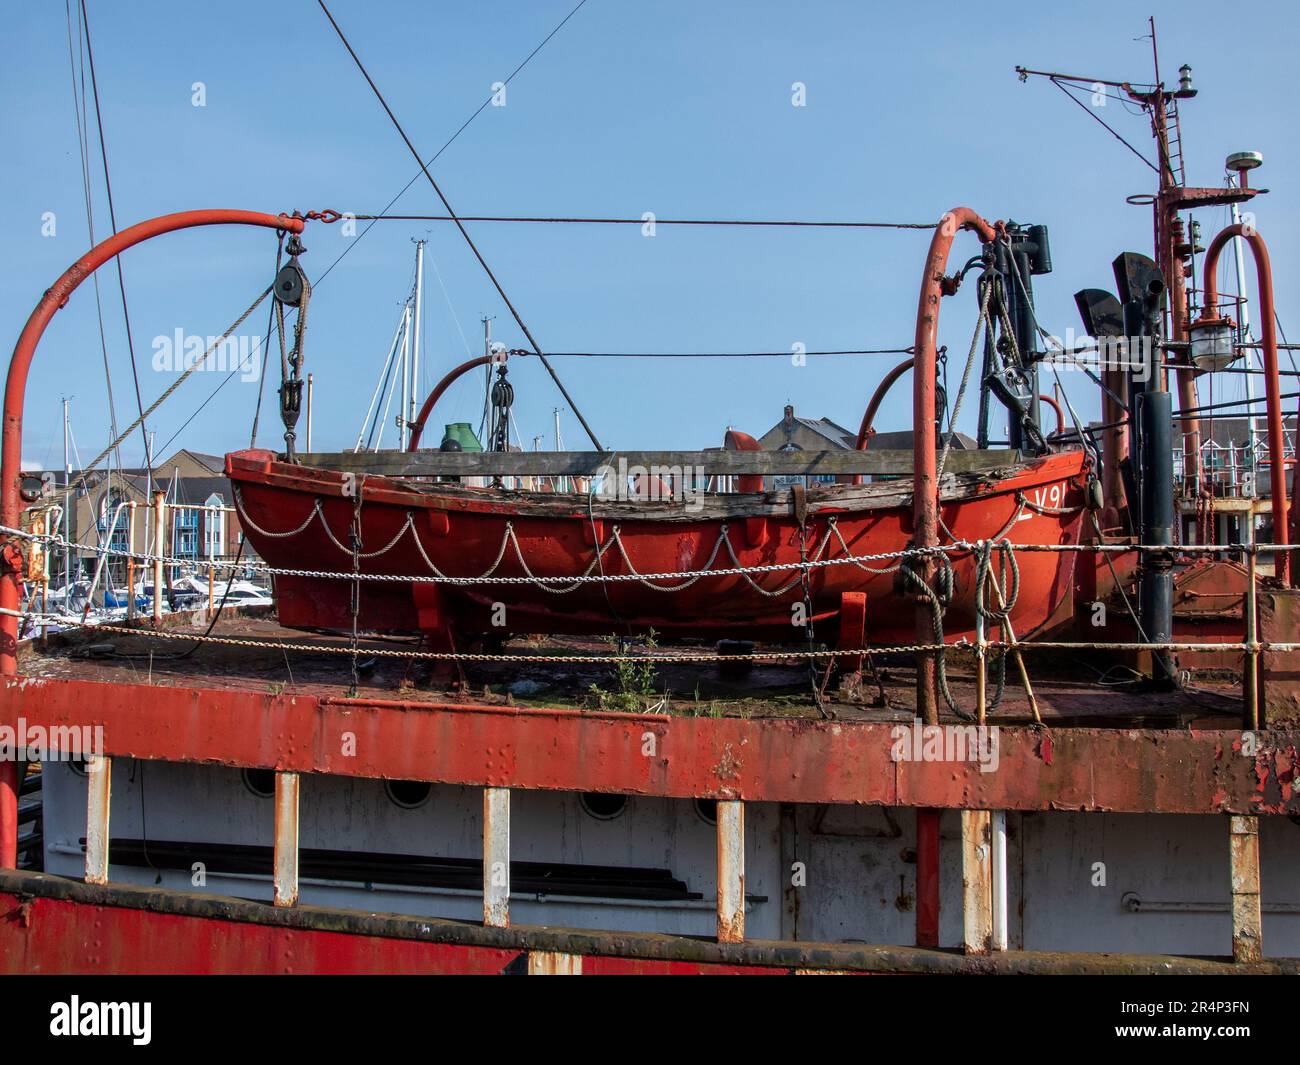 Swansea, Wales, UK. May 23rd, 2023: Close-up of the Helwick (Lightship 91) in the Swansea docks. Stock Photo